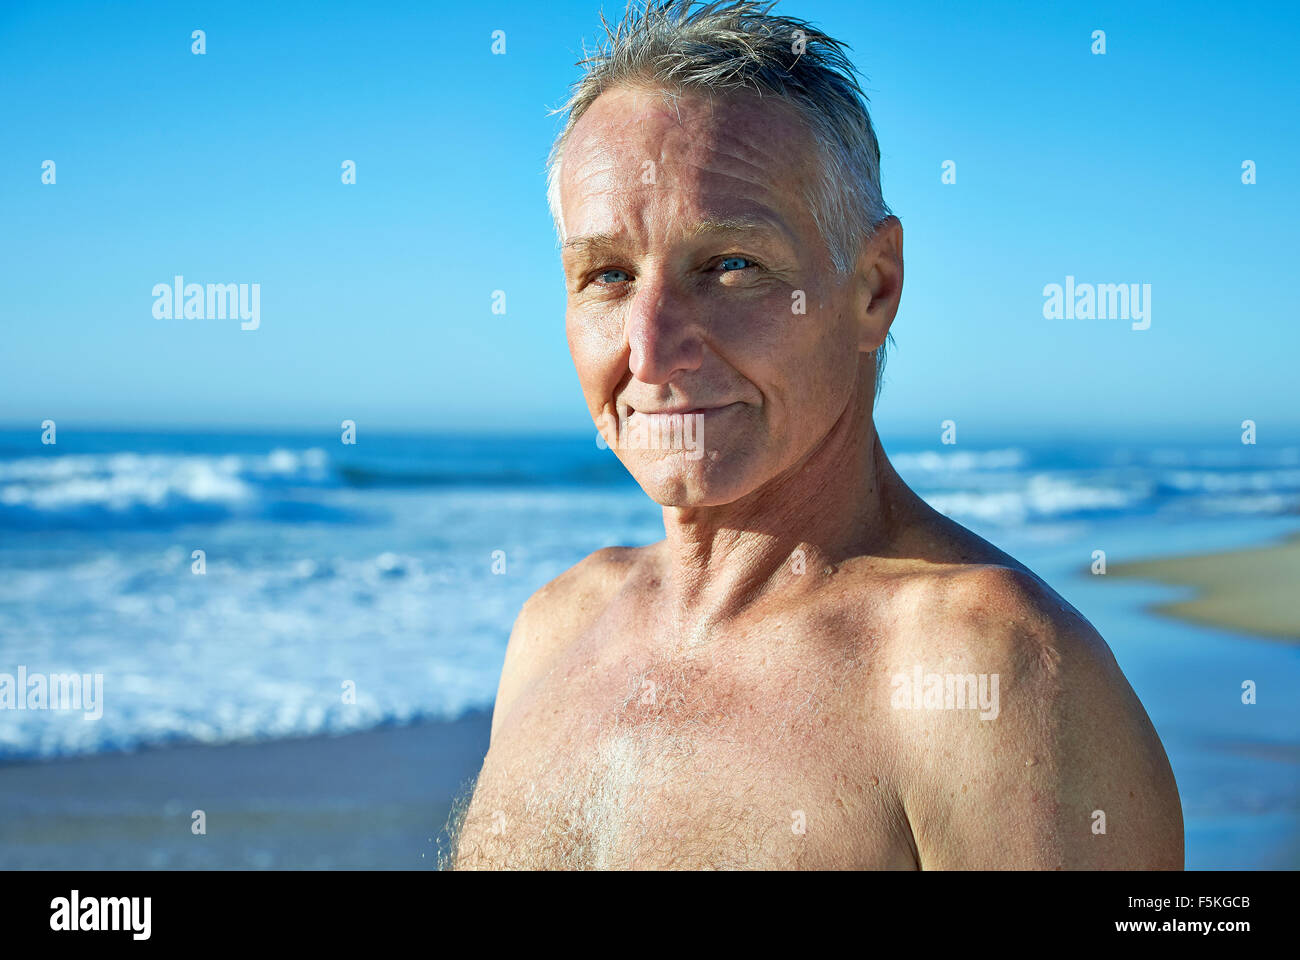 Head and shoulder portrait of a mature aged man with beach foreshore background Stock Photo